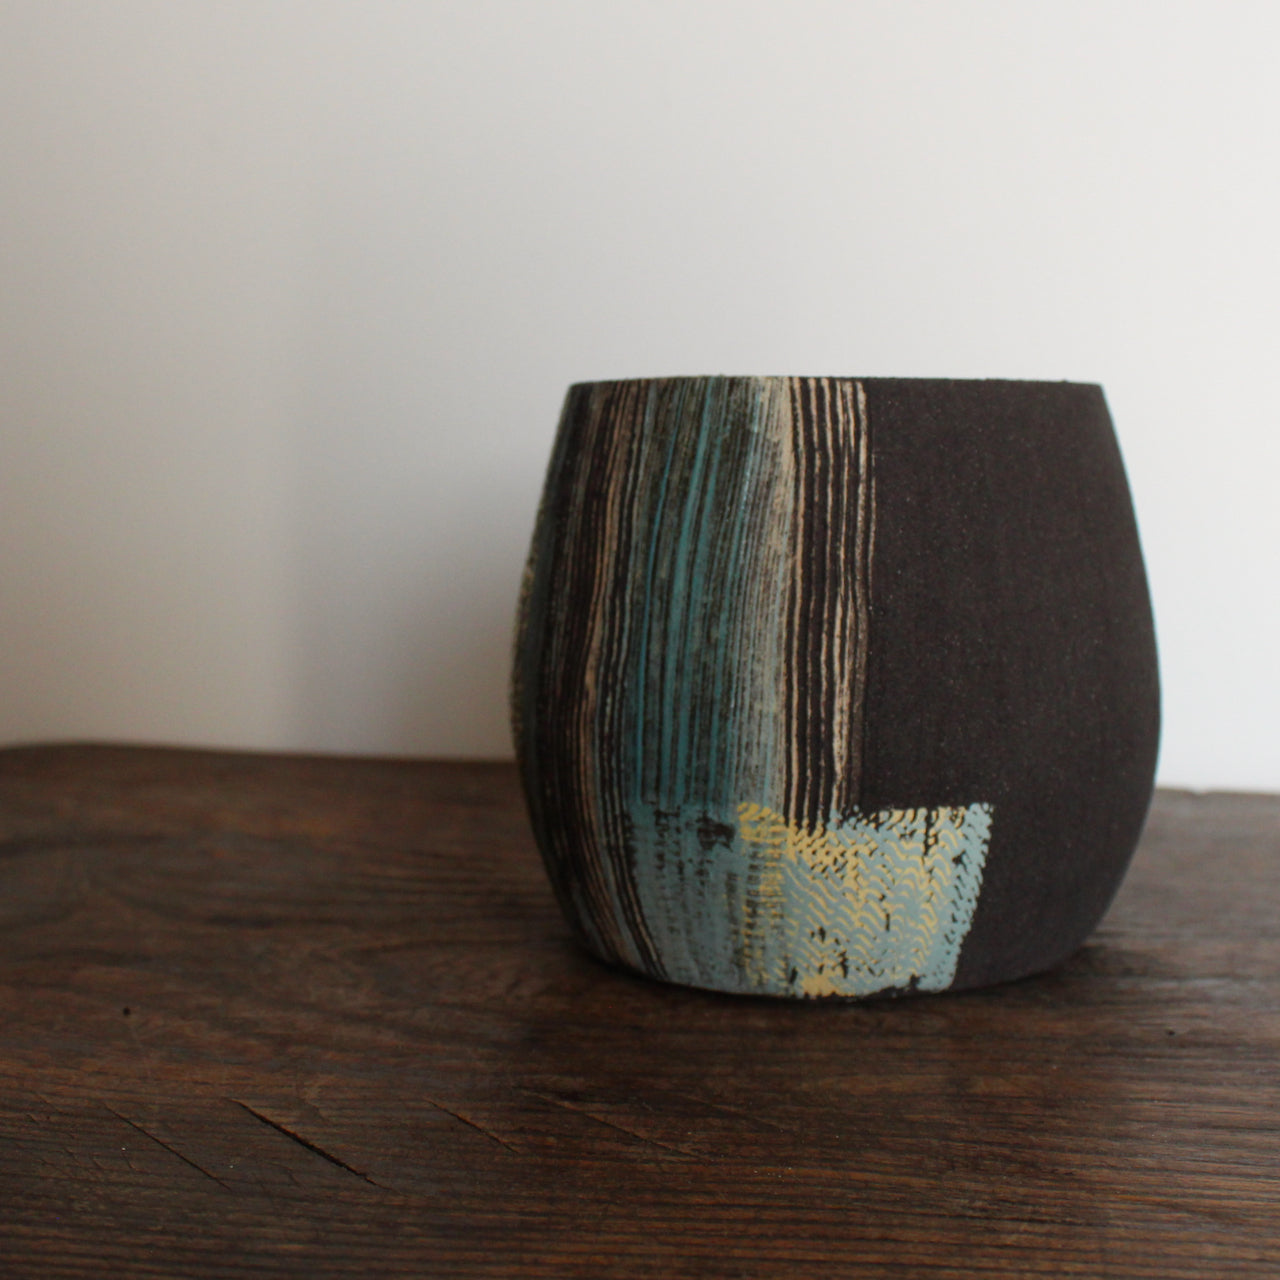 A Ceramic vessel with blue, yellow and white glaze on dark brown clay by Cornish artist Anthea Bowen